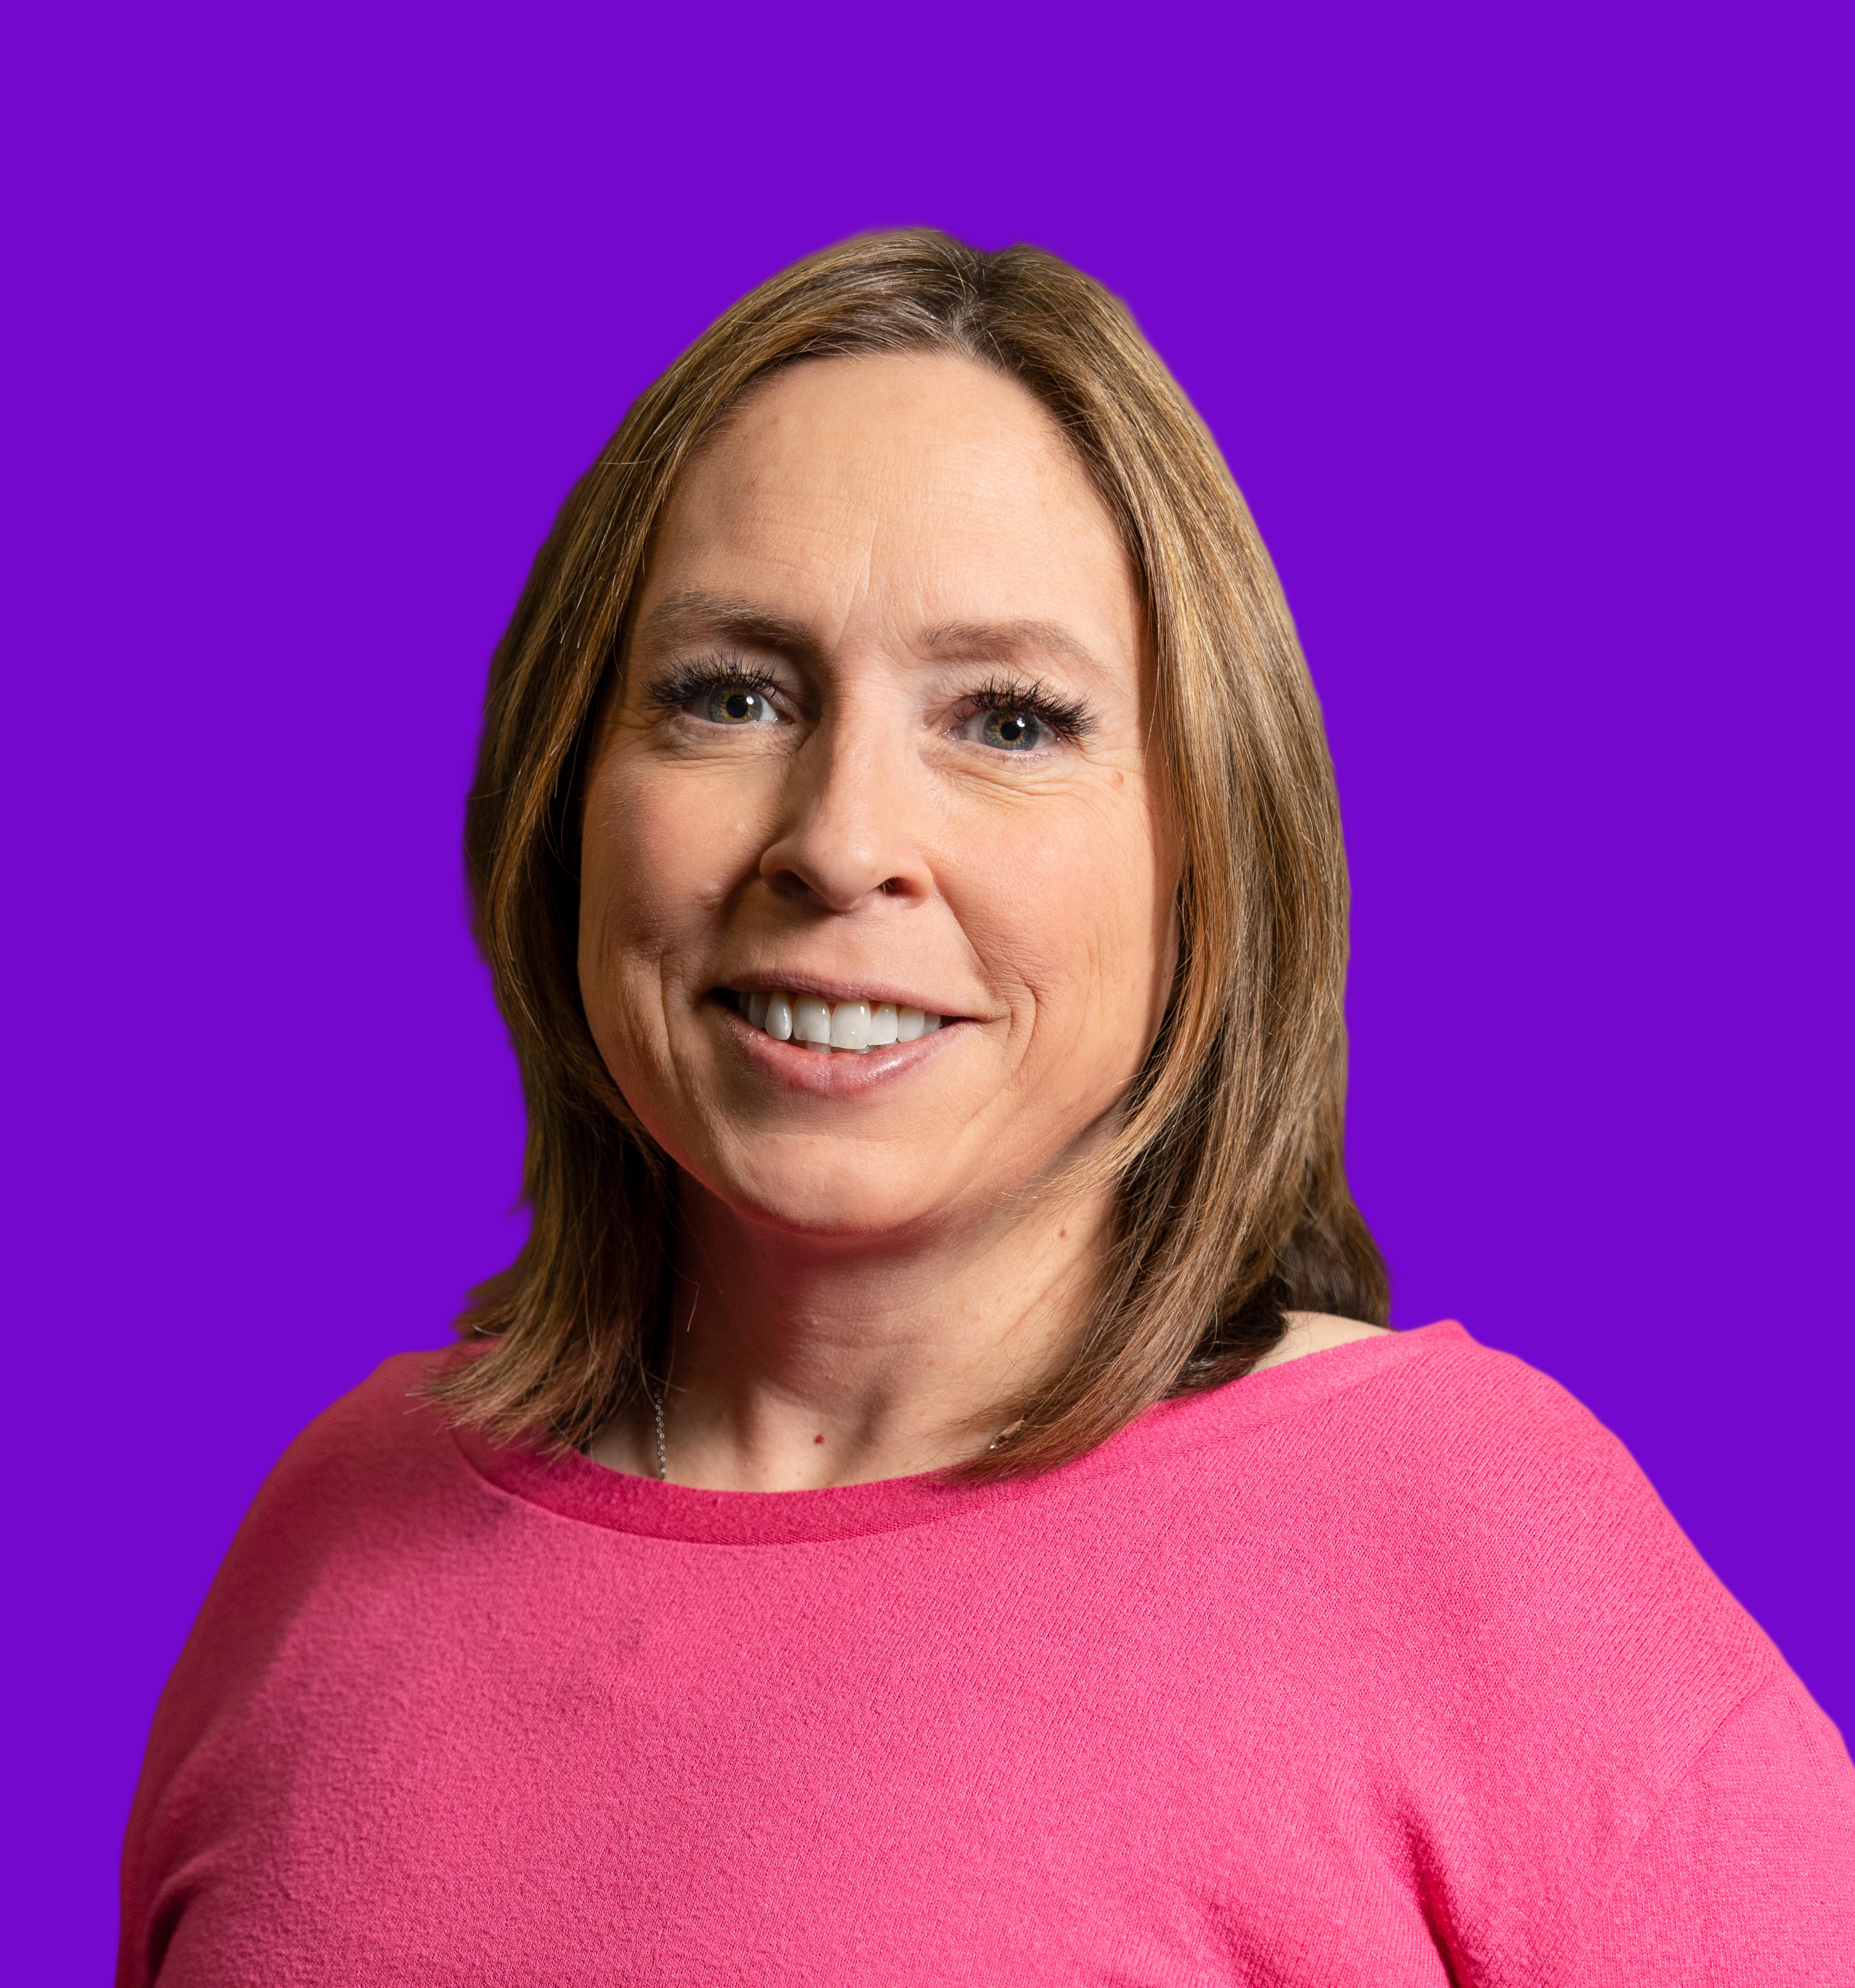 Profile image of Catriona Hill on a solid purple background.